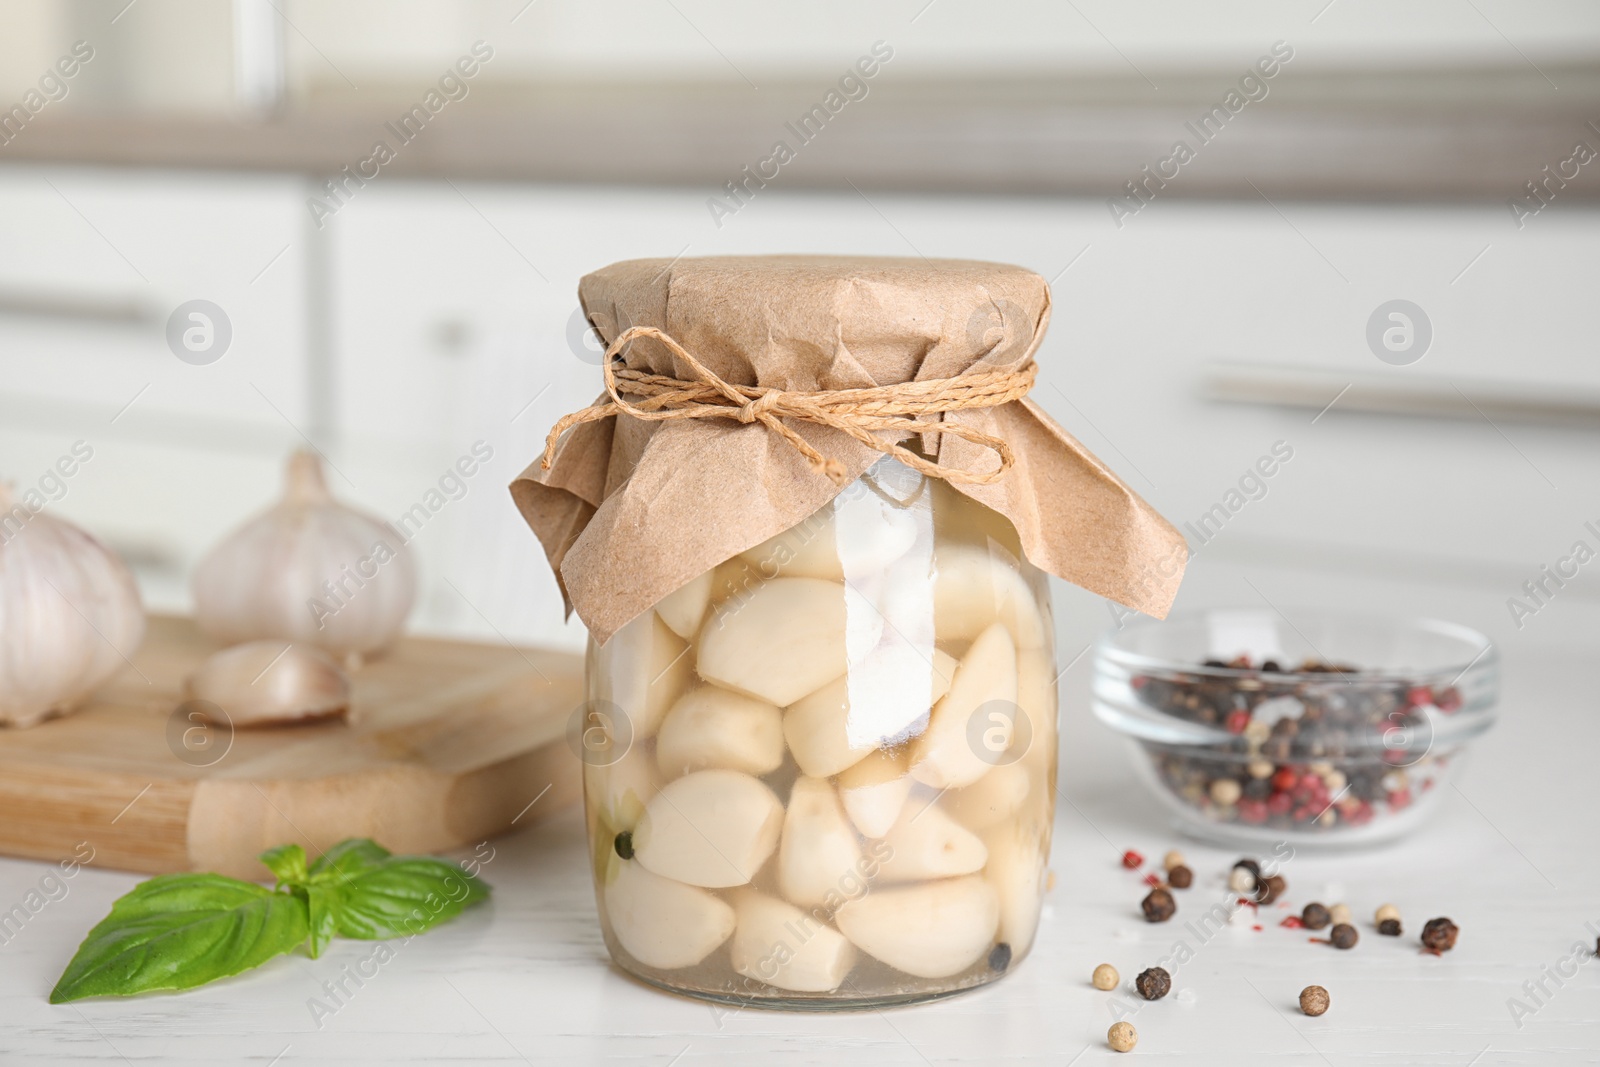 Photo of Composition with jar of pickled garlic on wooden table indoors